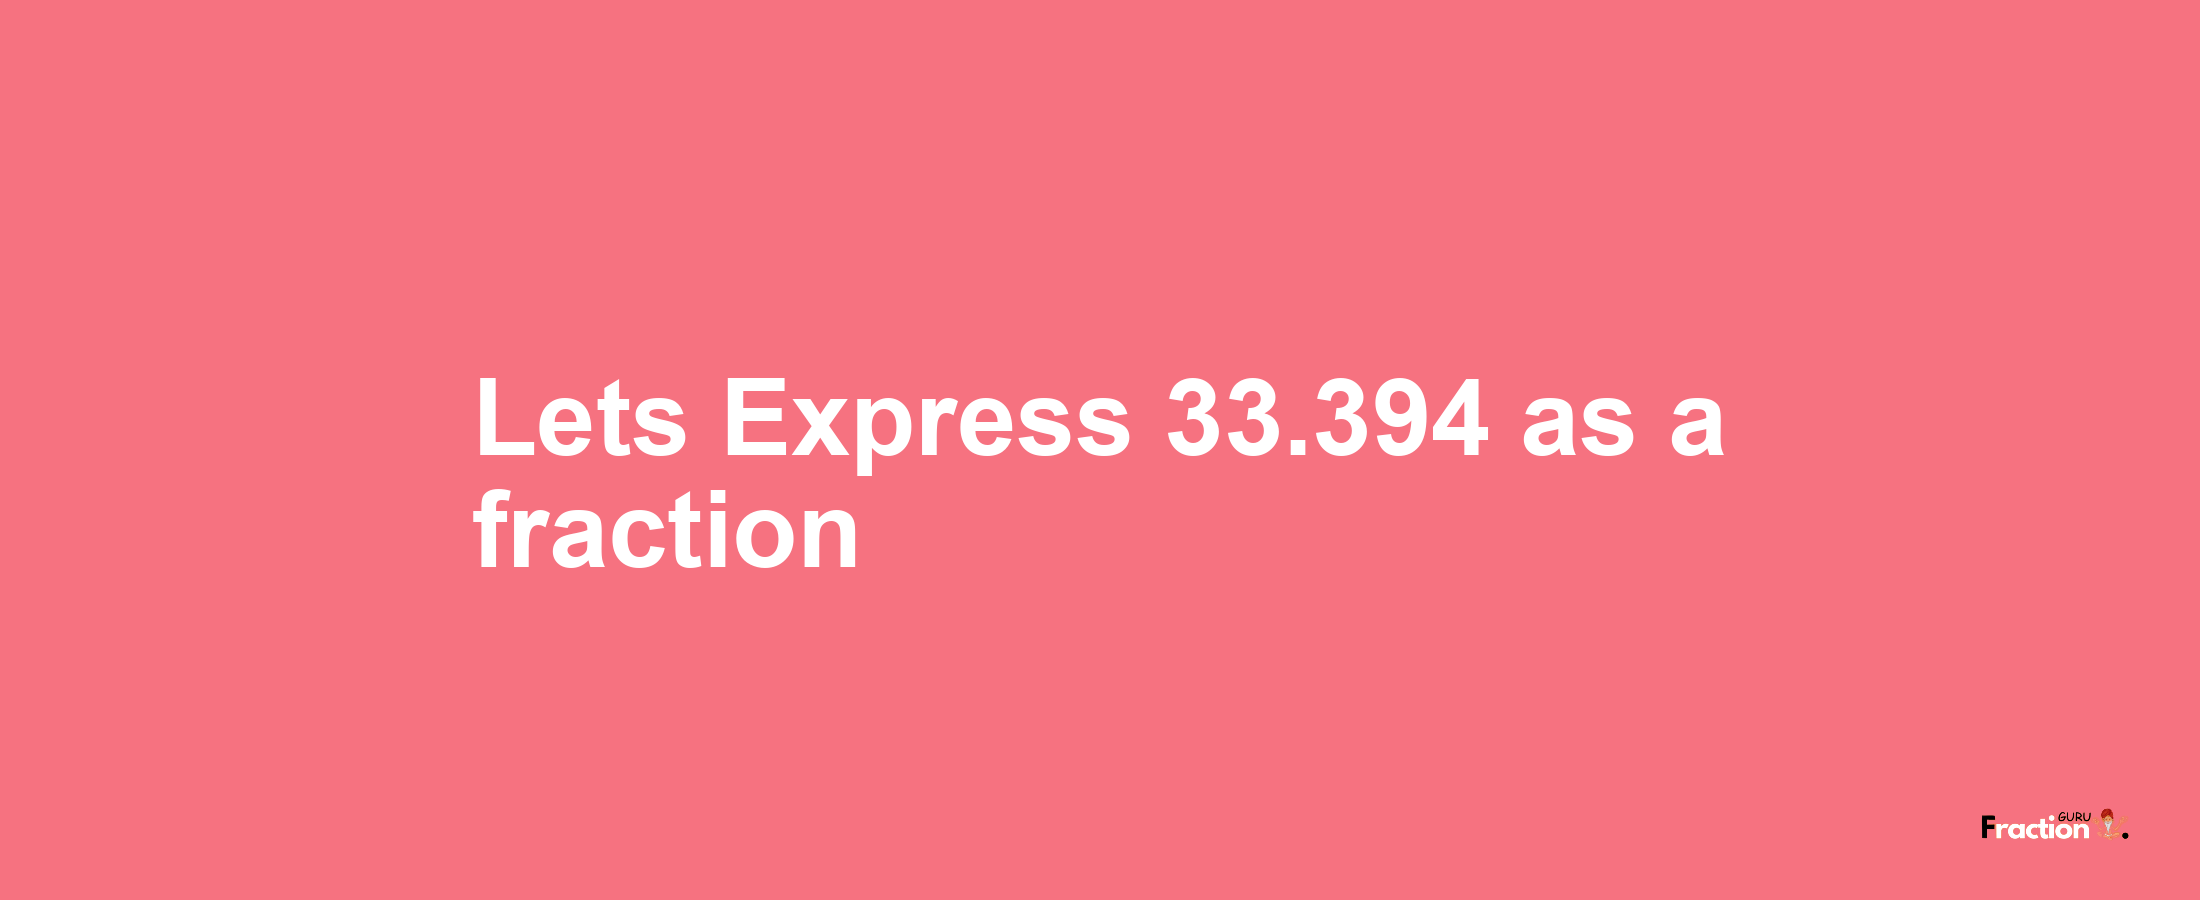 Lets Express 33.394 as afraction